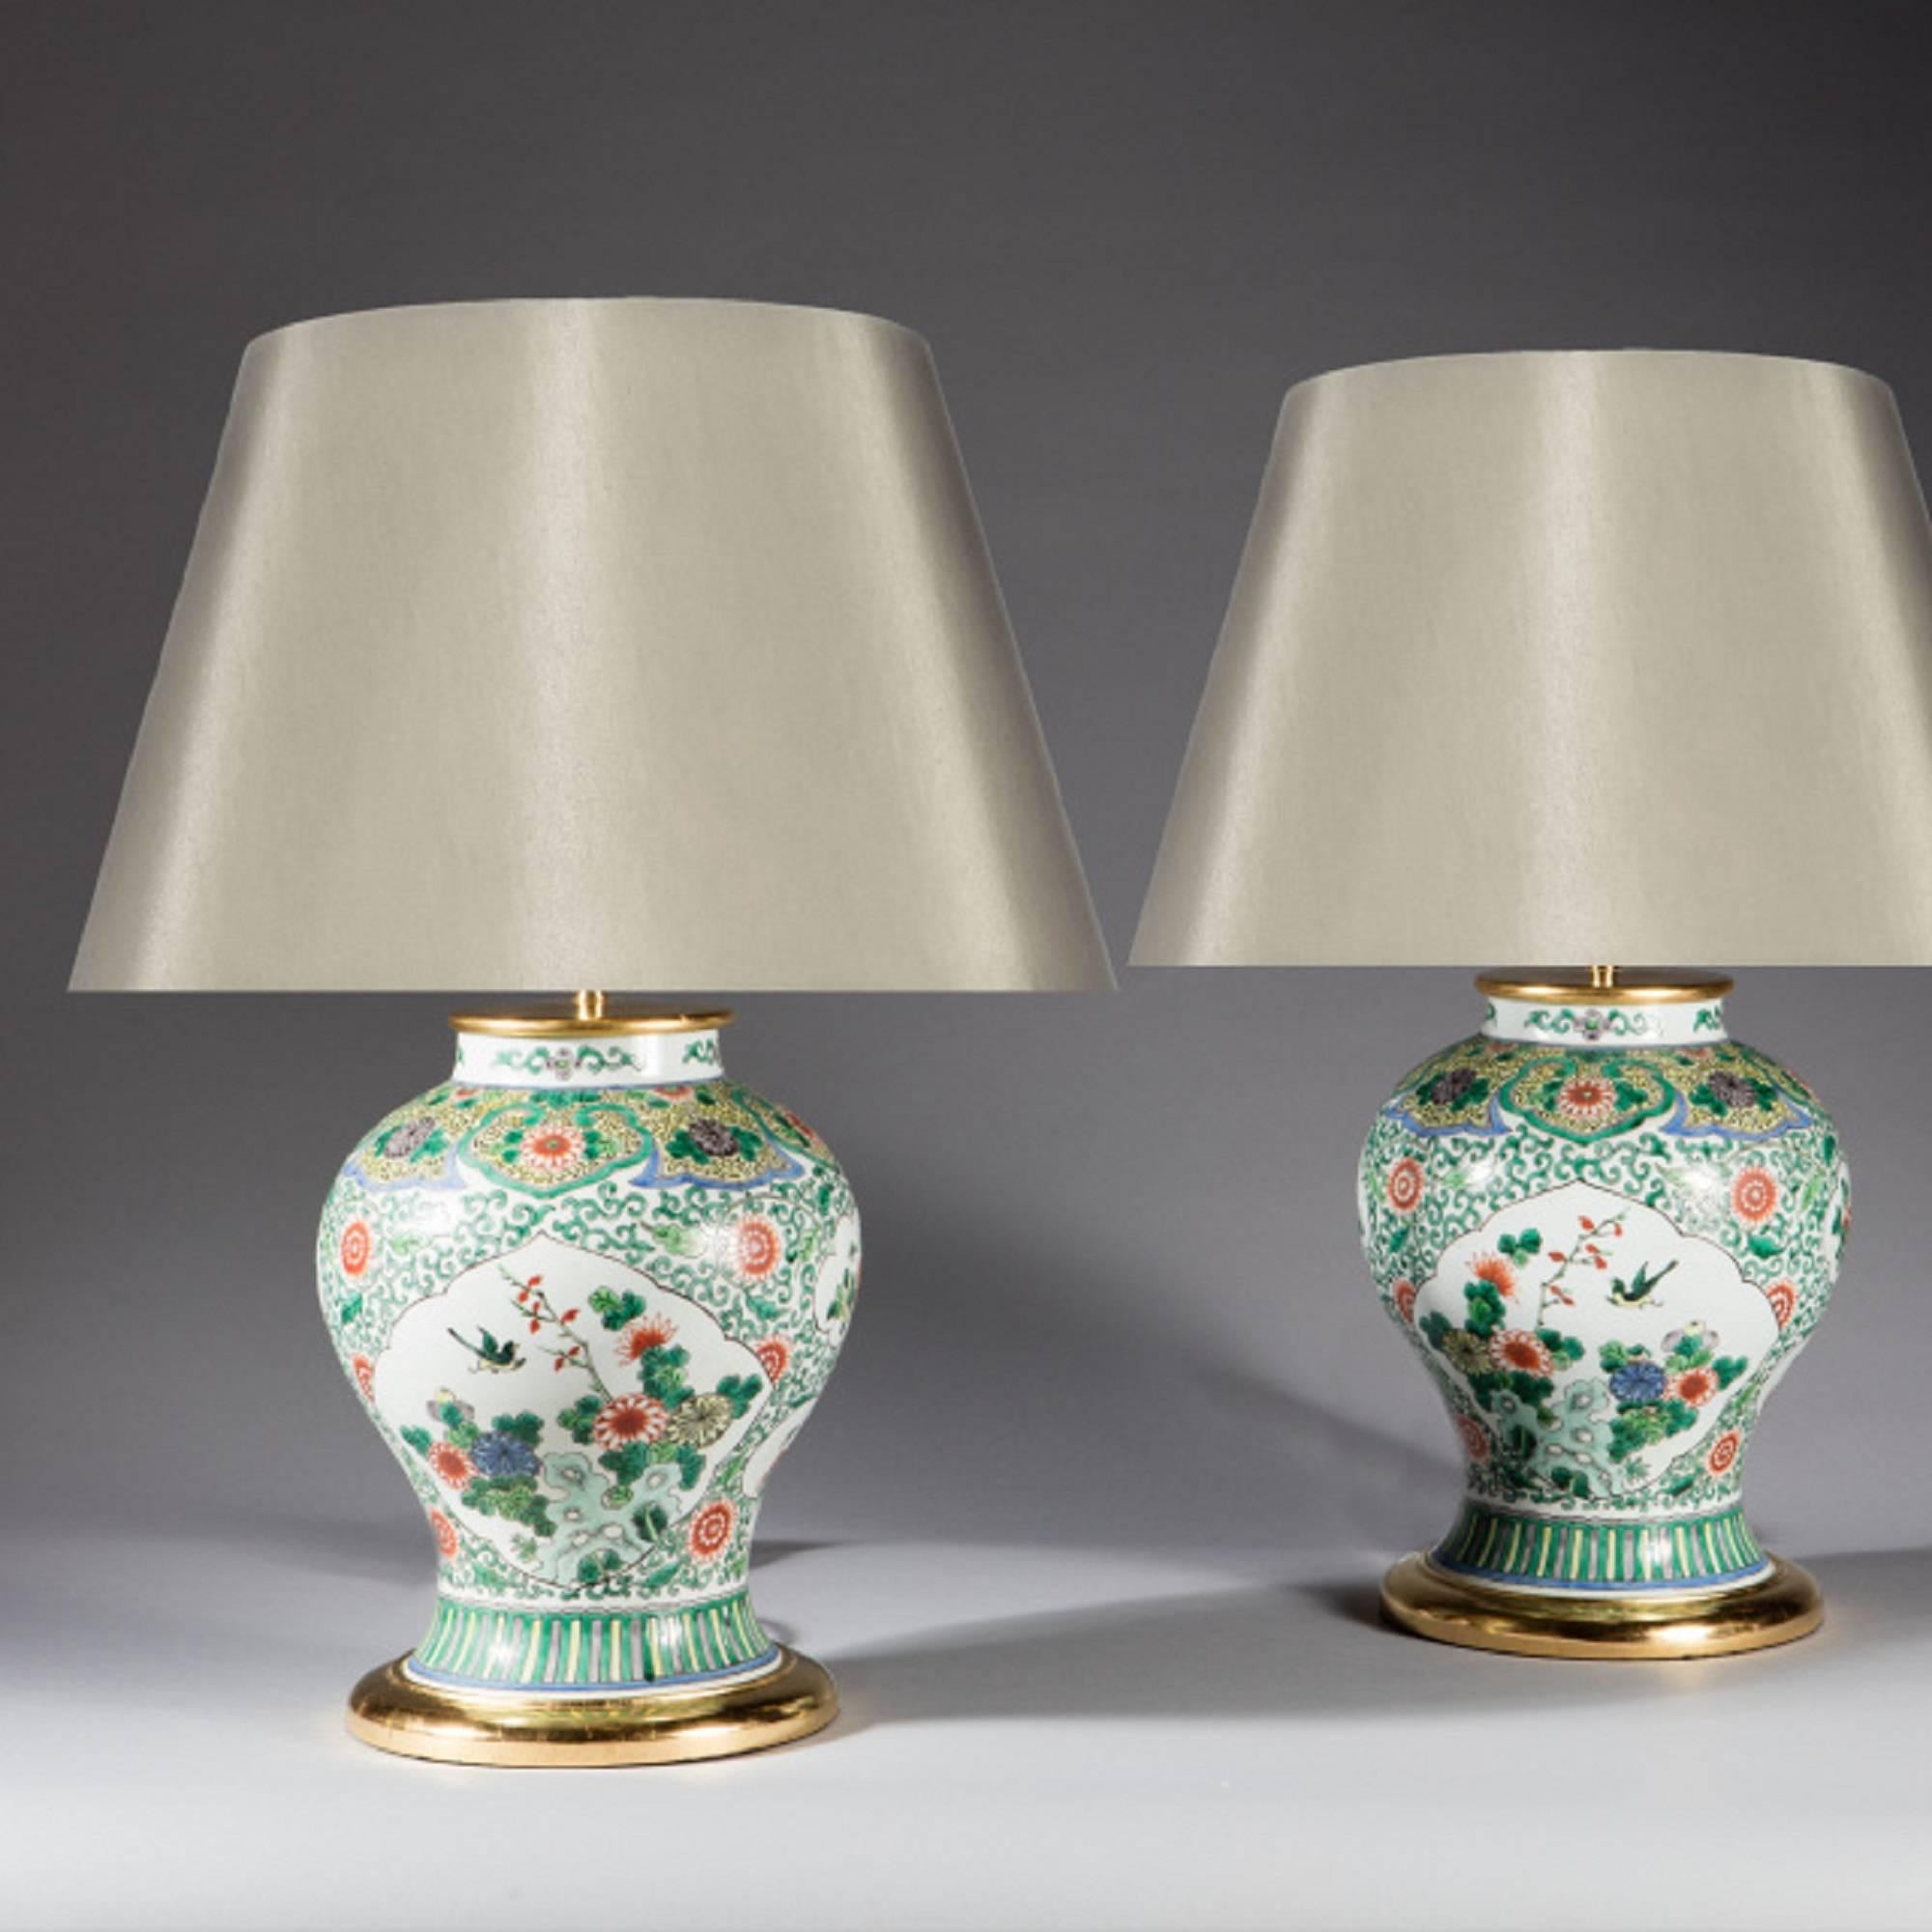 A pair of Chinese export famille verte baluster vases, decorated in fine detail with flowers and branches and architectural vignettes.

China, circa 1850

Measures: Height excluding shade Height 15 ins (38 cm).

 